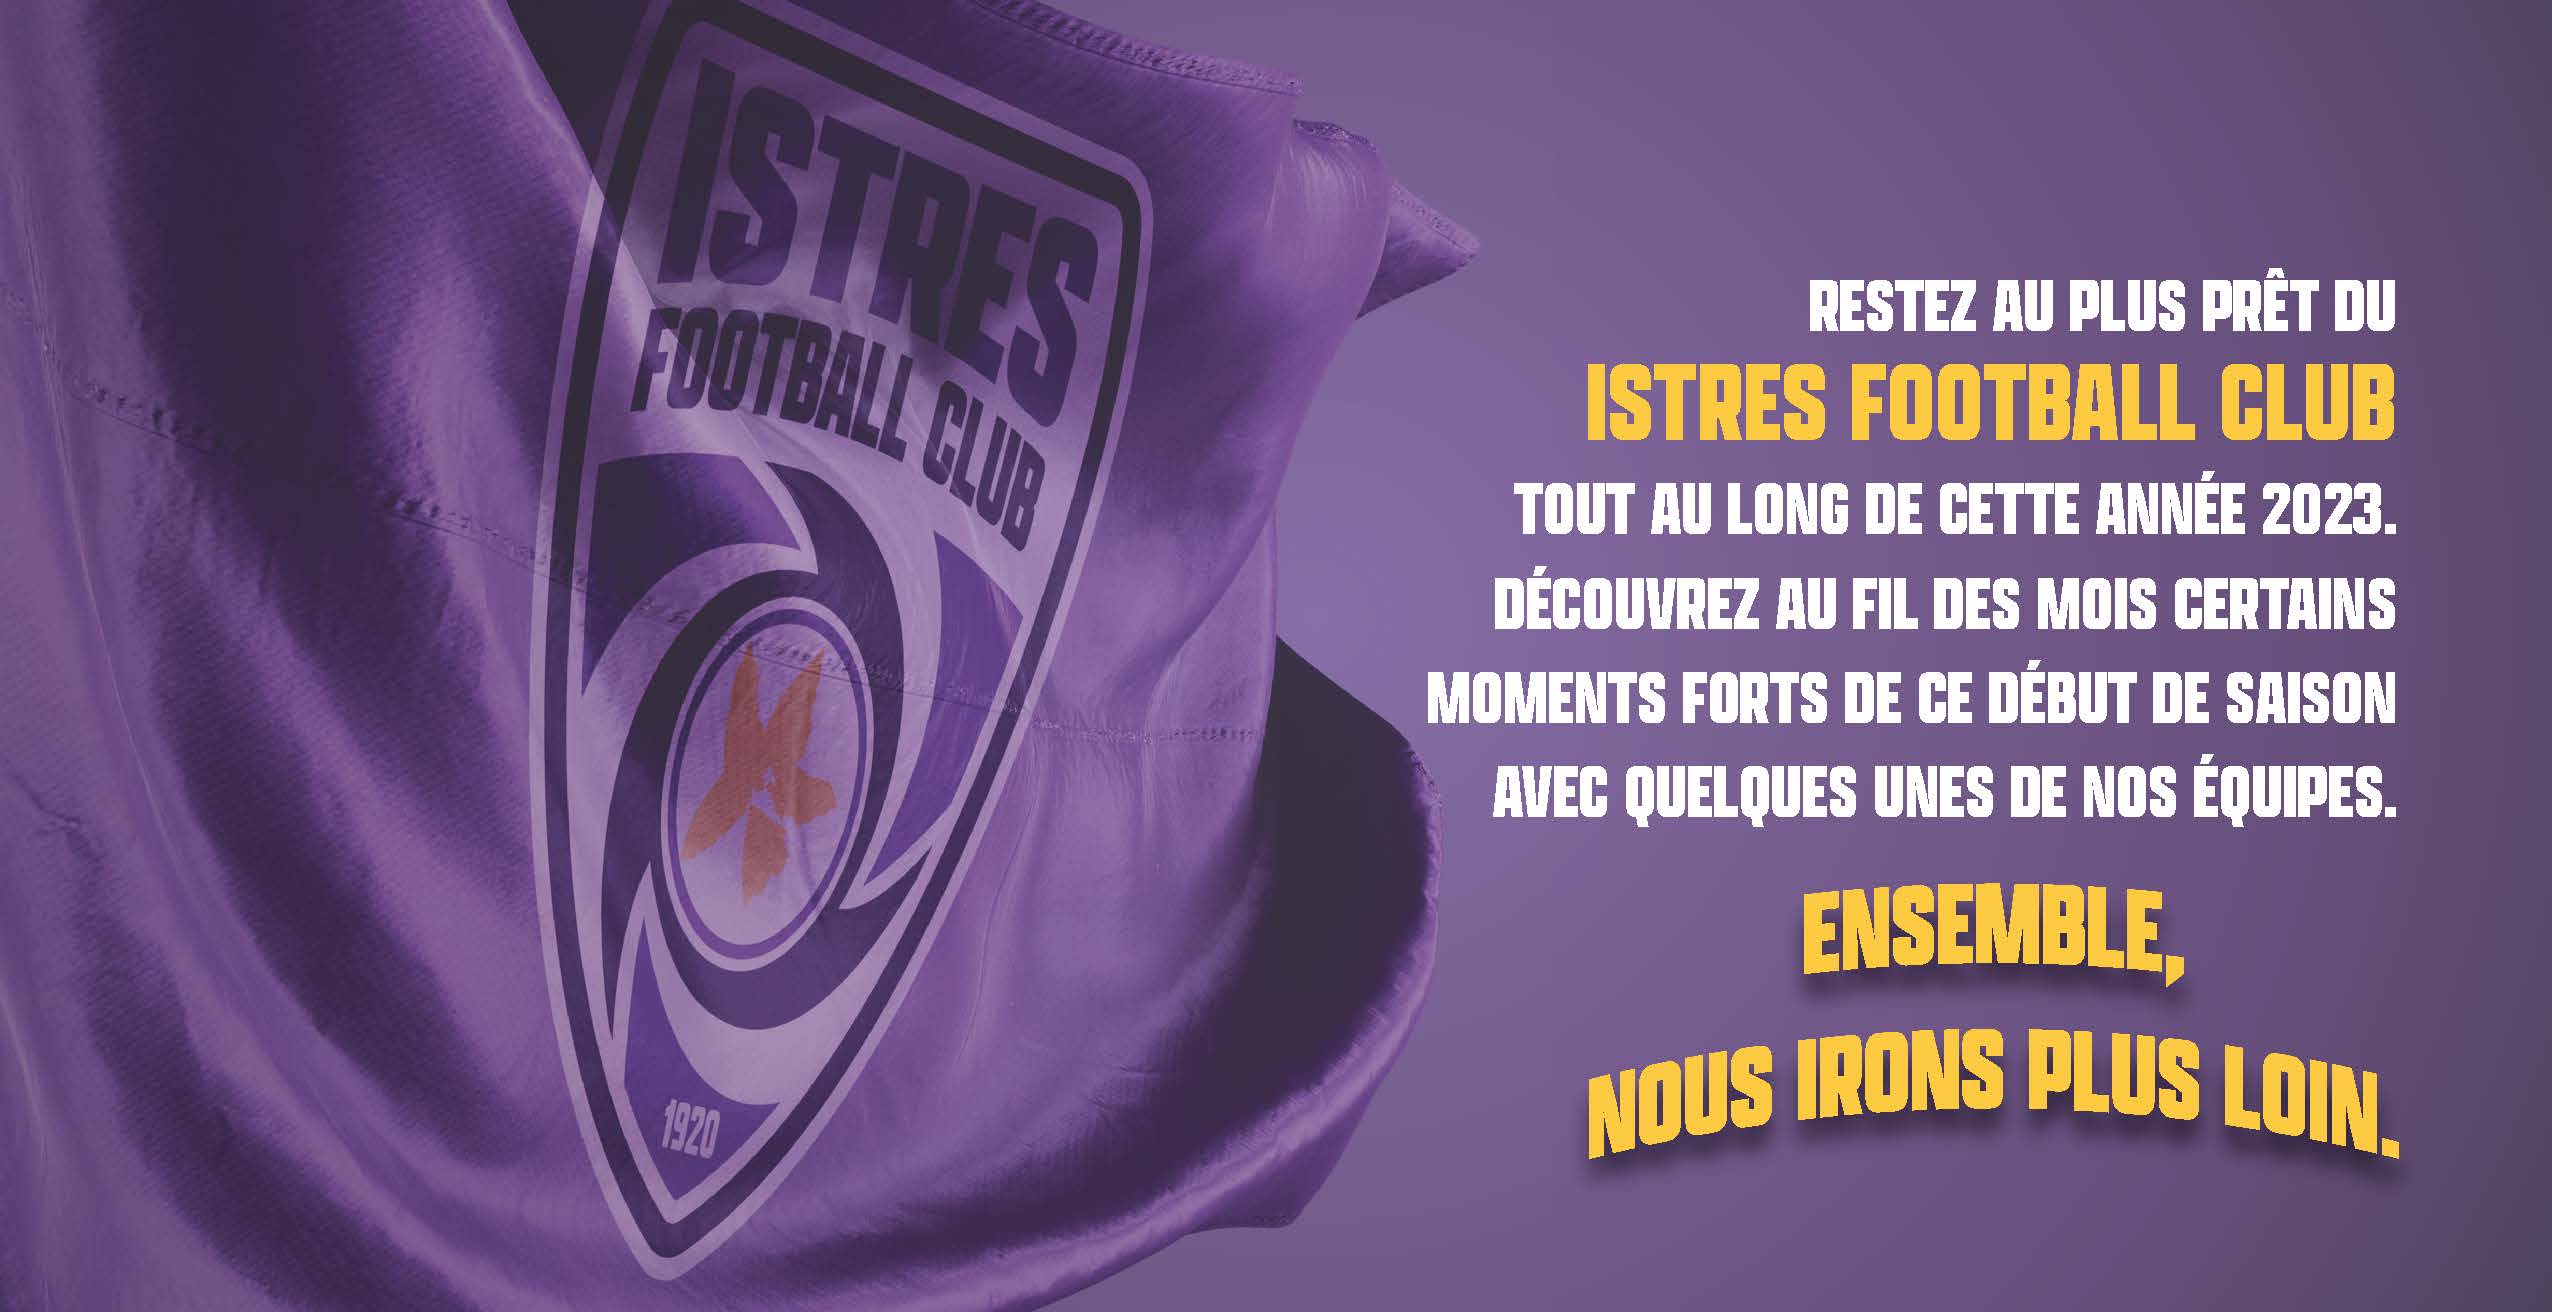 Istres FC - Calendrier 2023_Page_02